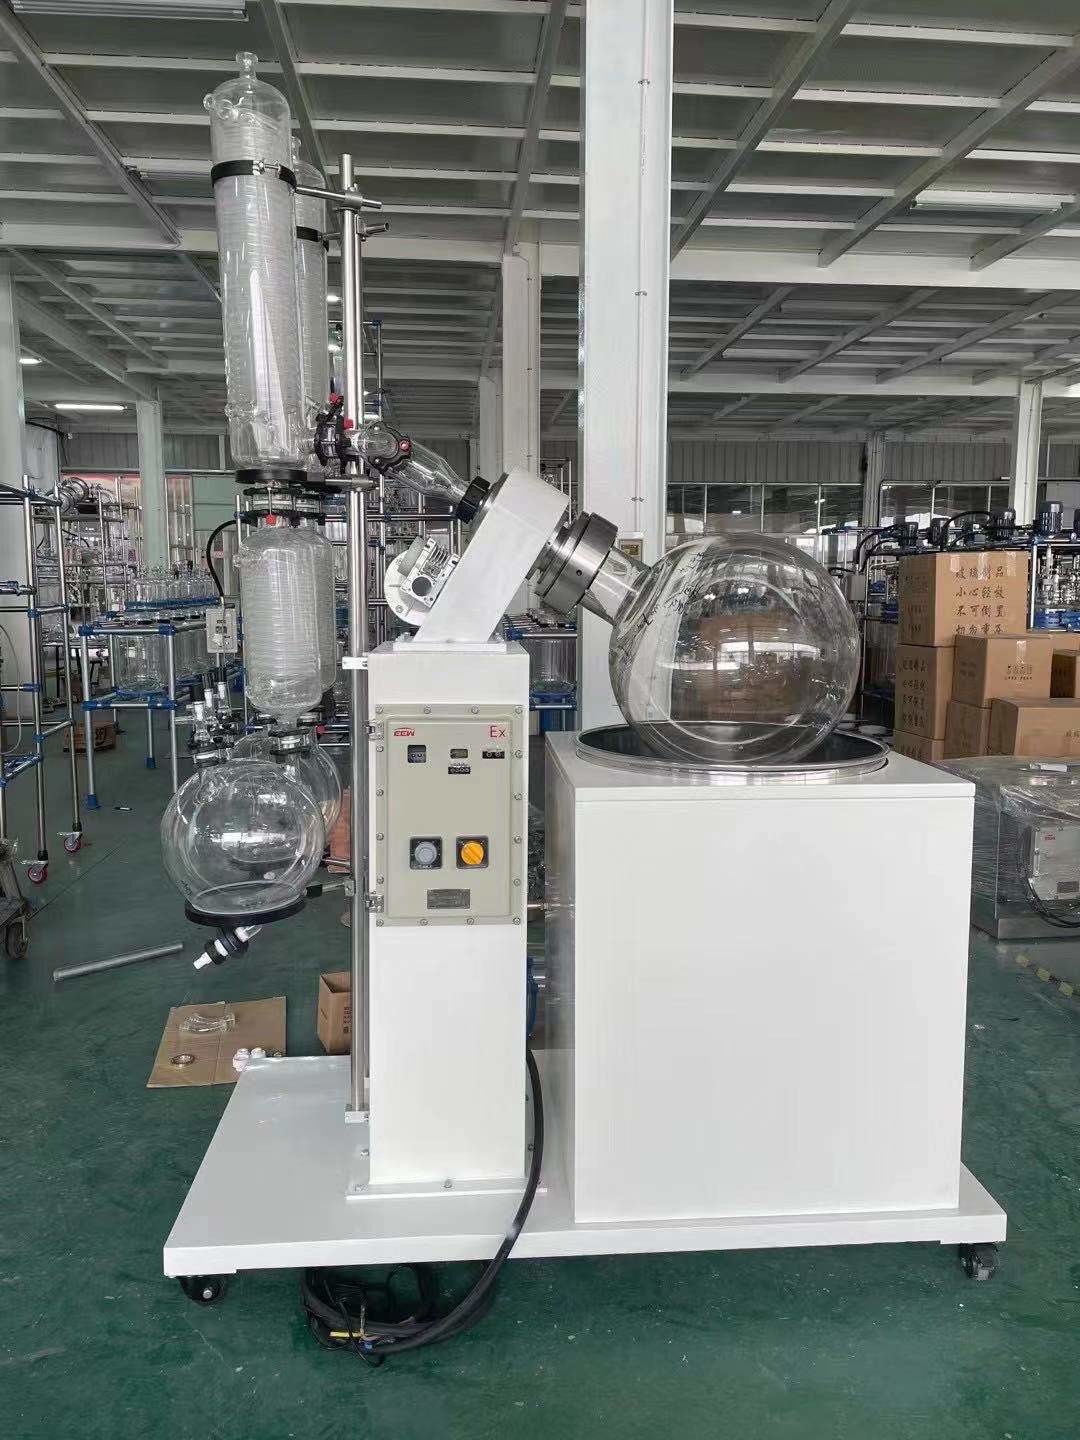 100L Vacuum Rotovap Rotary Evaporator For Solvent Recovery In Lab Or Production